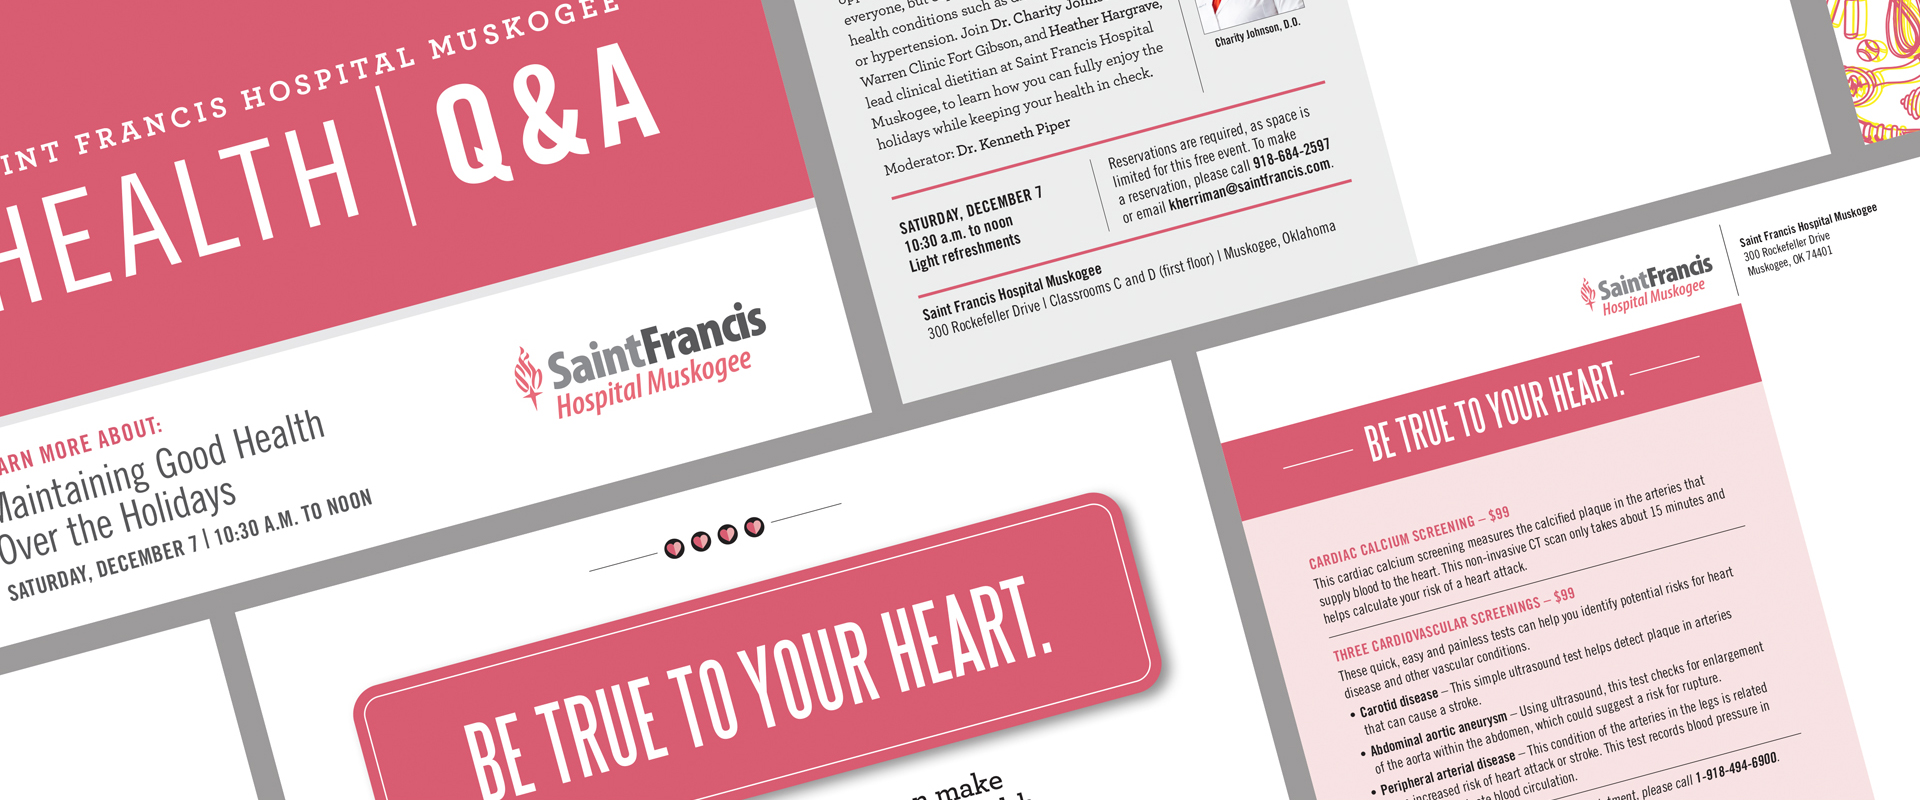 Marketing materials for Saint Francis Health System designed by AcrobatAnt.